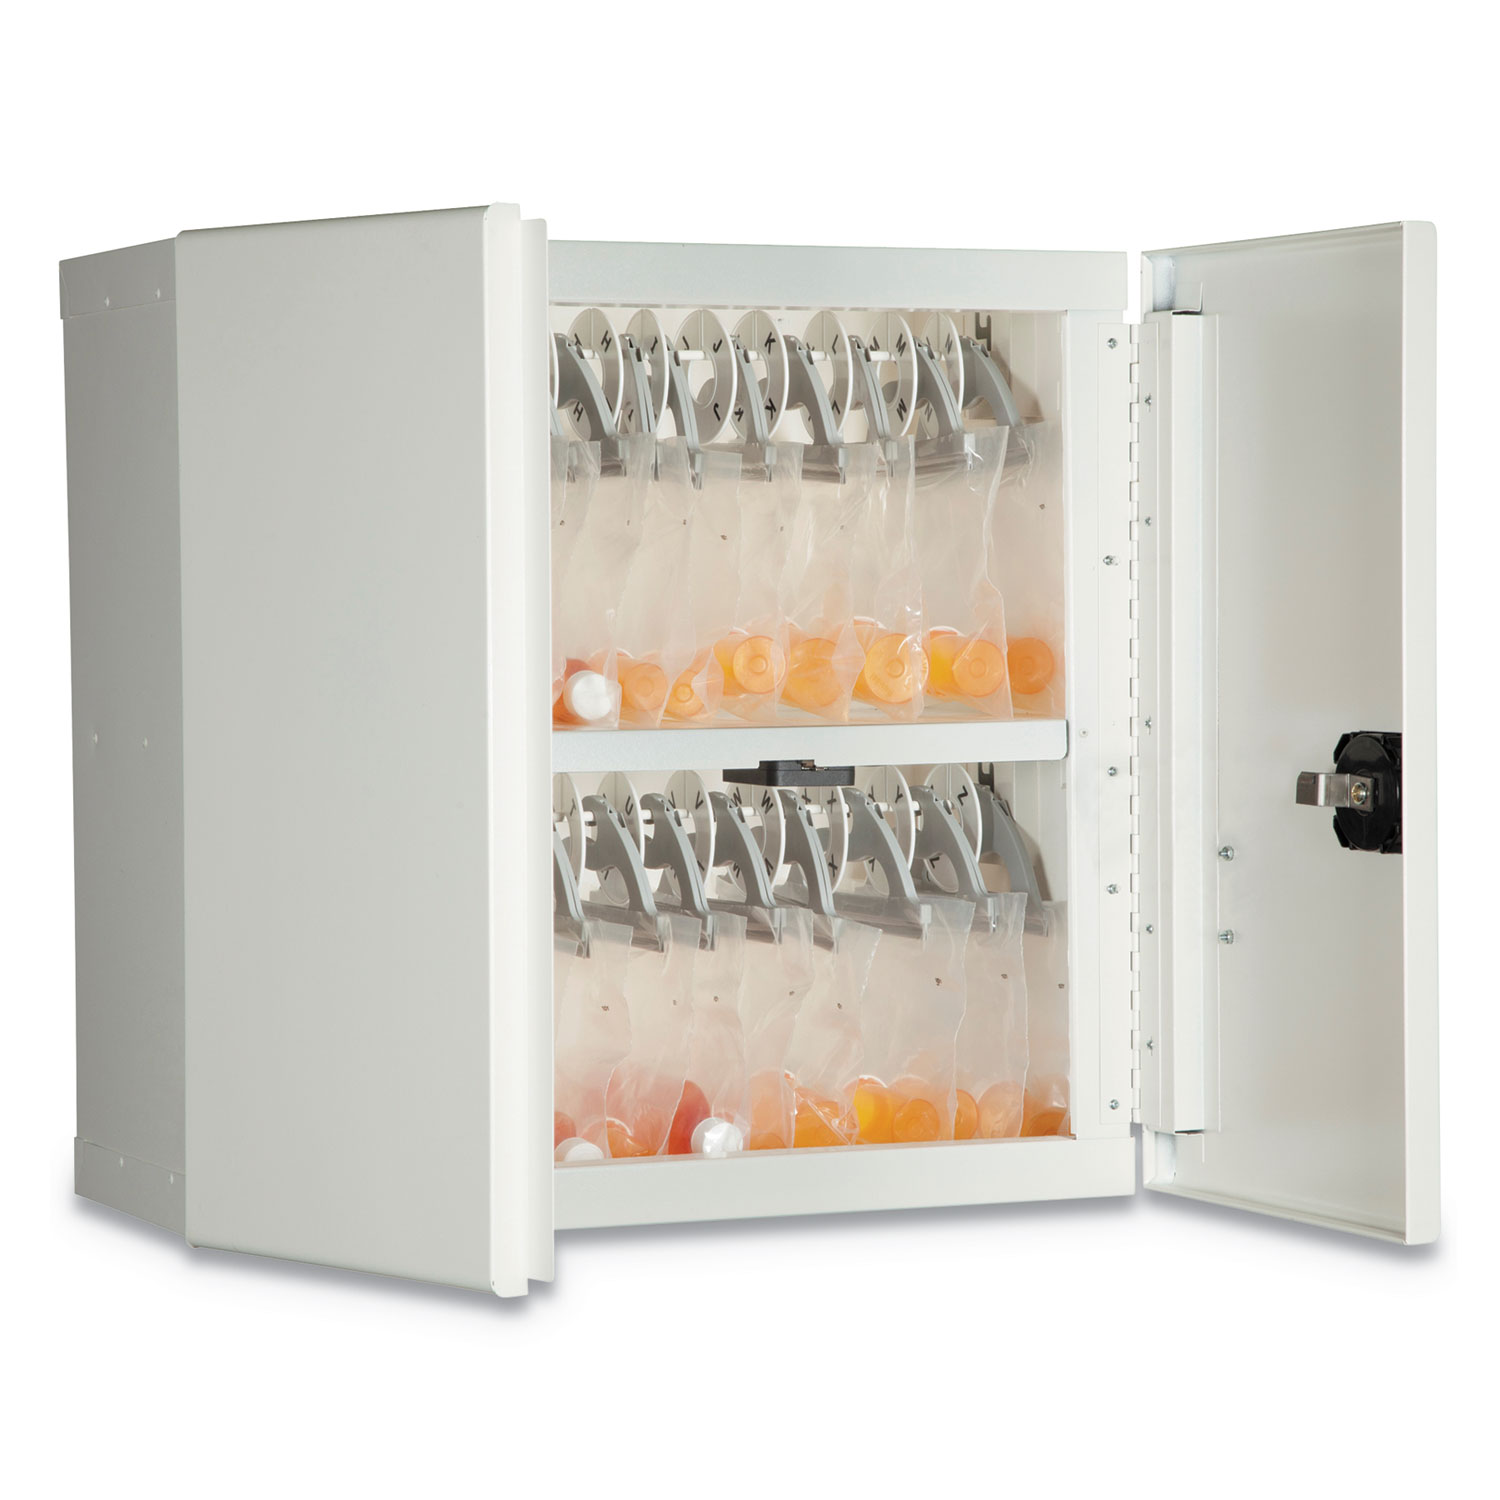 Medical Storage Cabinet with Electronic Lock, 24w x 14d x 24h, White